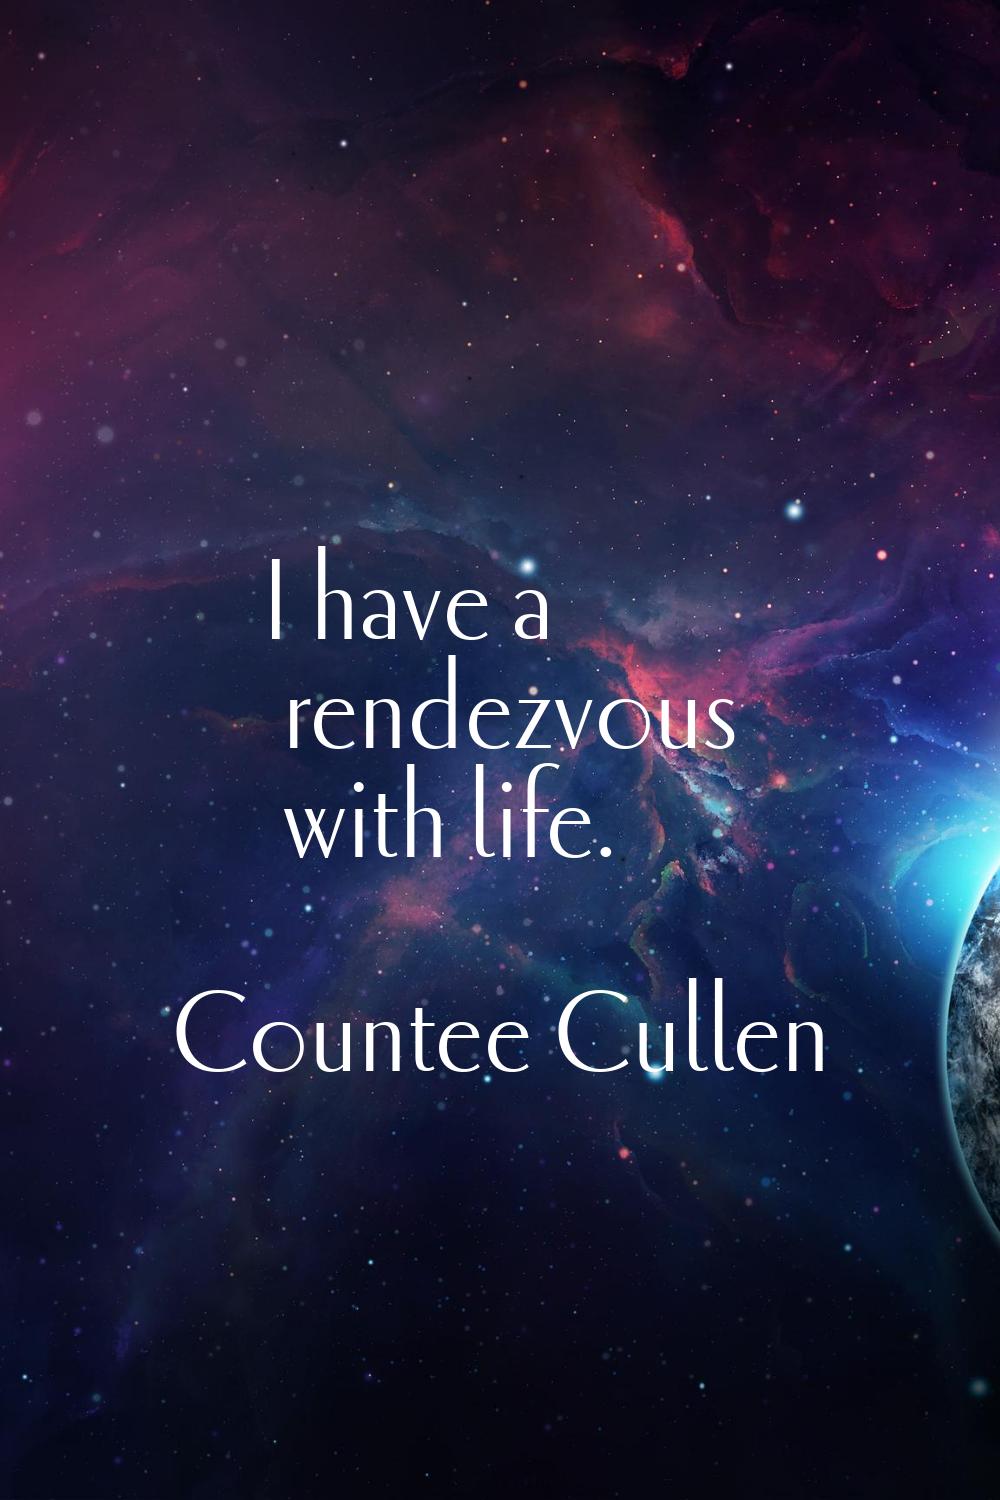 I have a rendezvous with life.